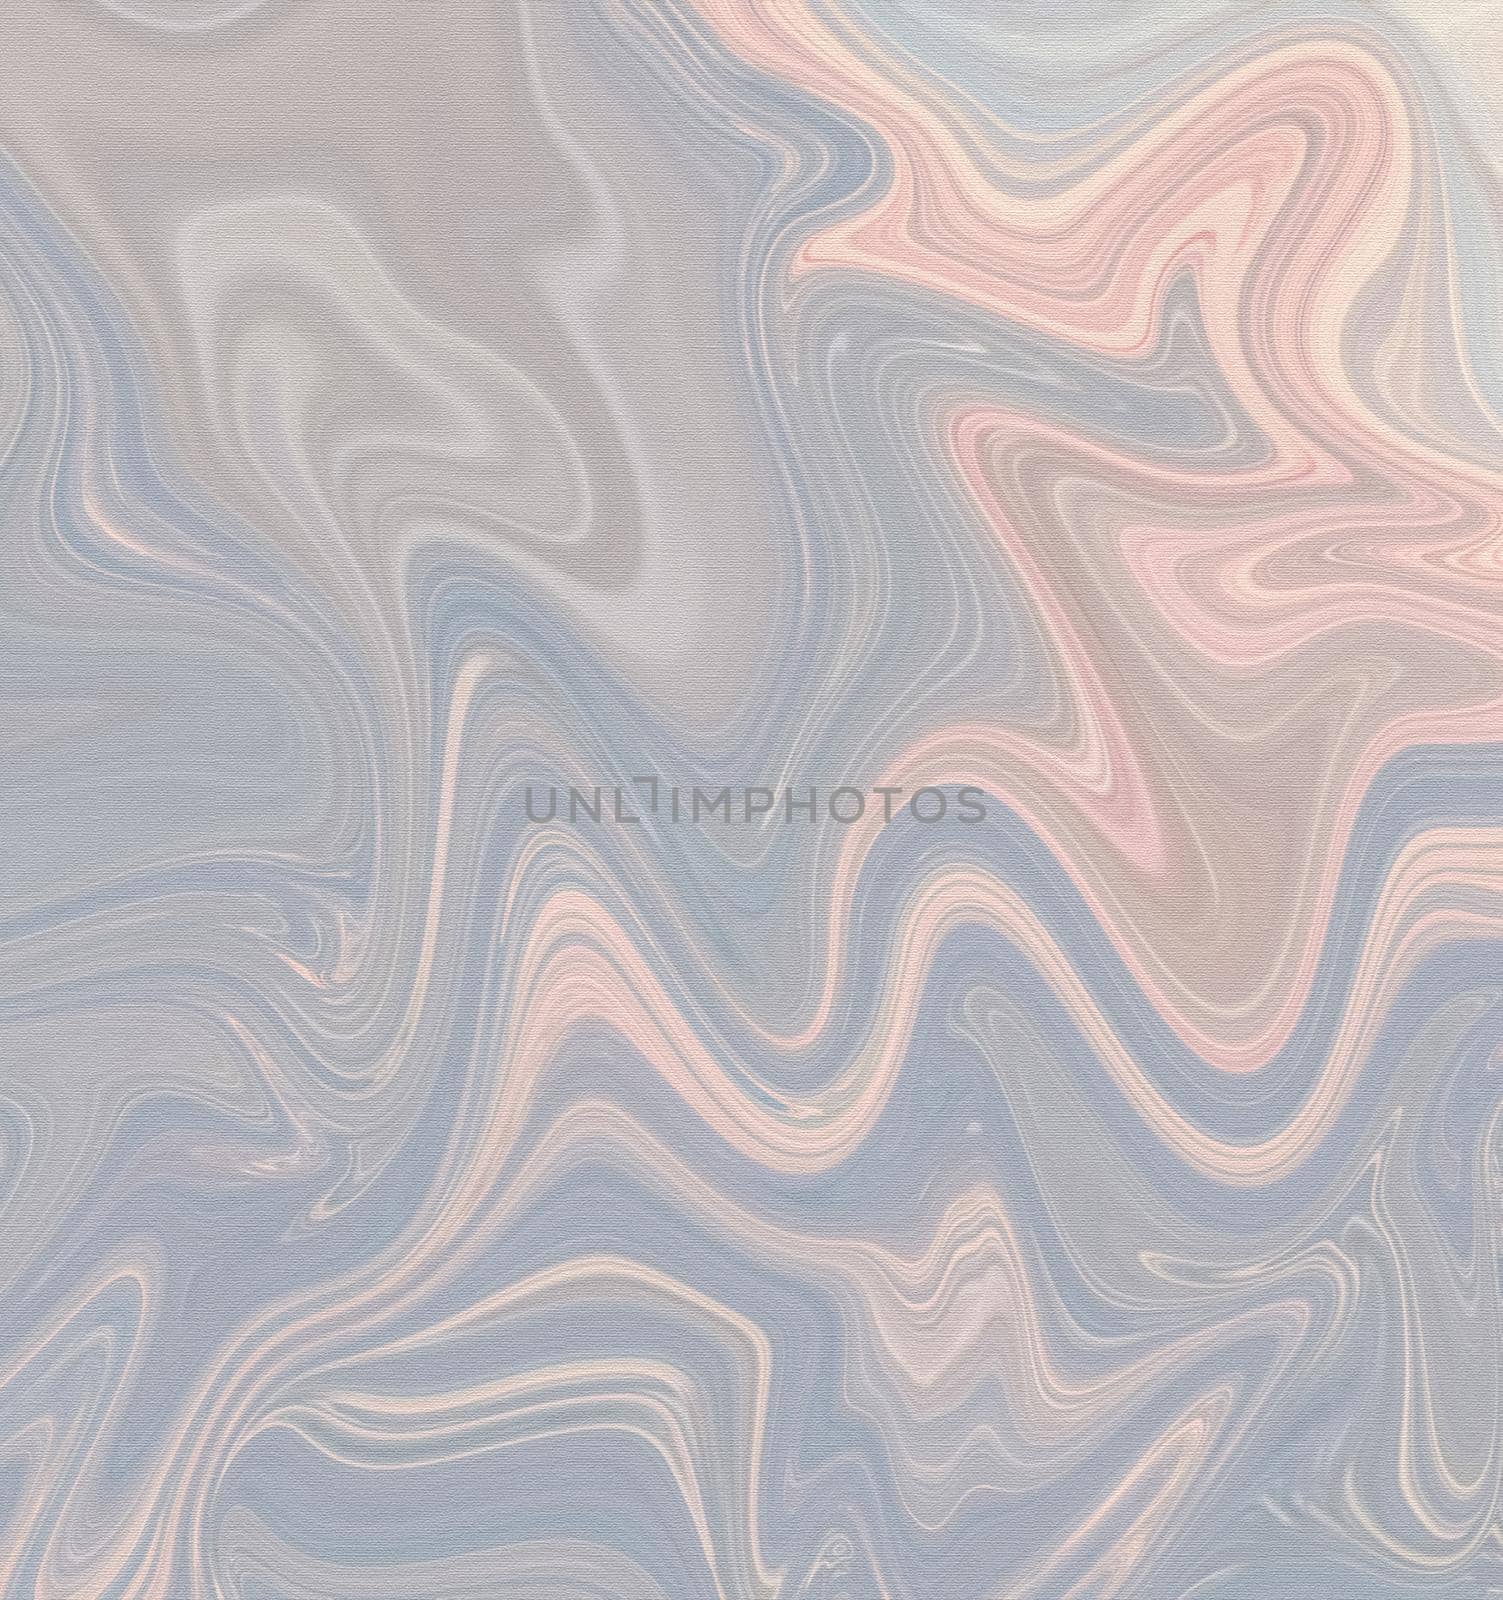 Marbling art texture, luxury marble background for interior design by Anneleven